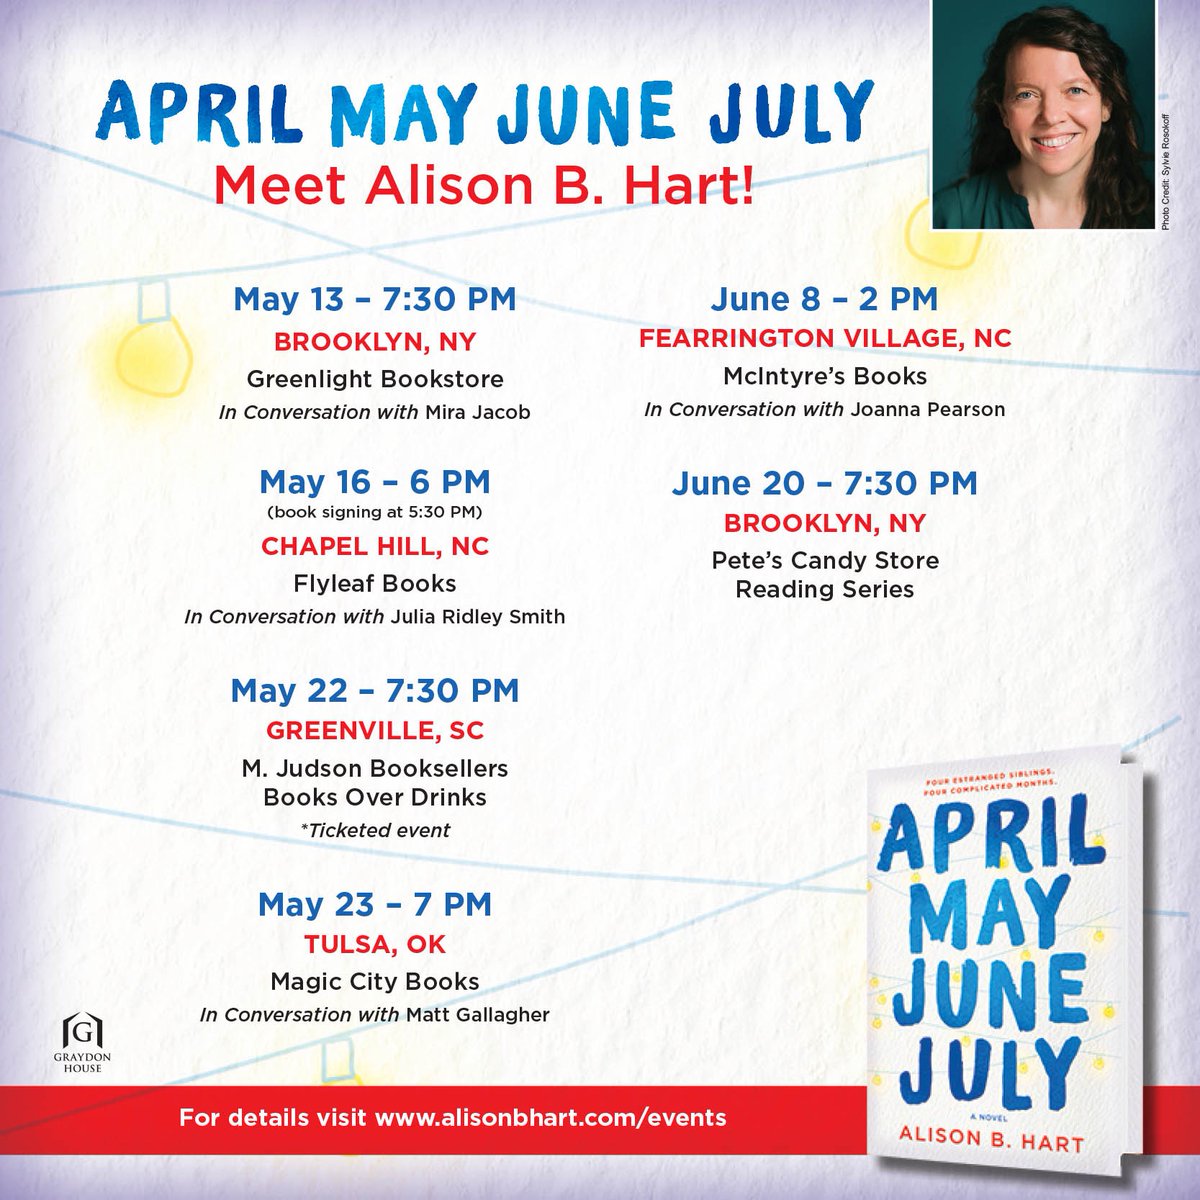 Less than 2 months until APRIL MAY JUNE JULY is out in the world! Here’s where I’ll be.